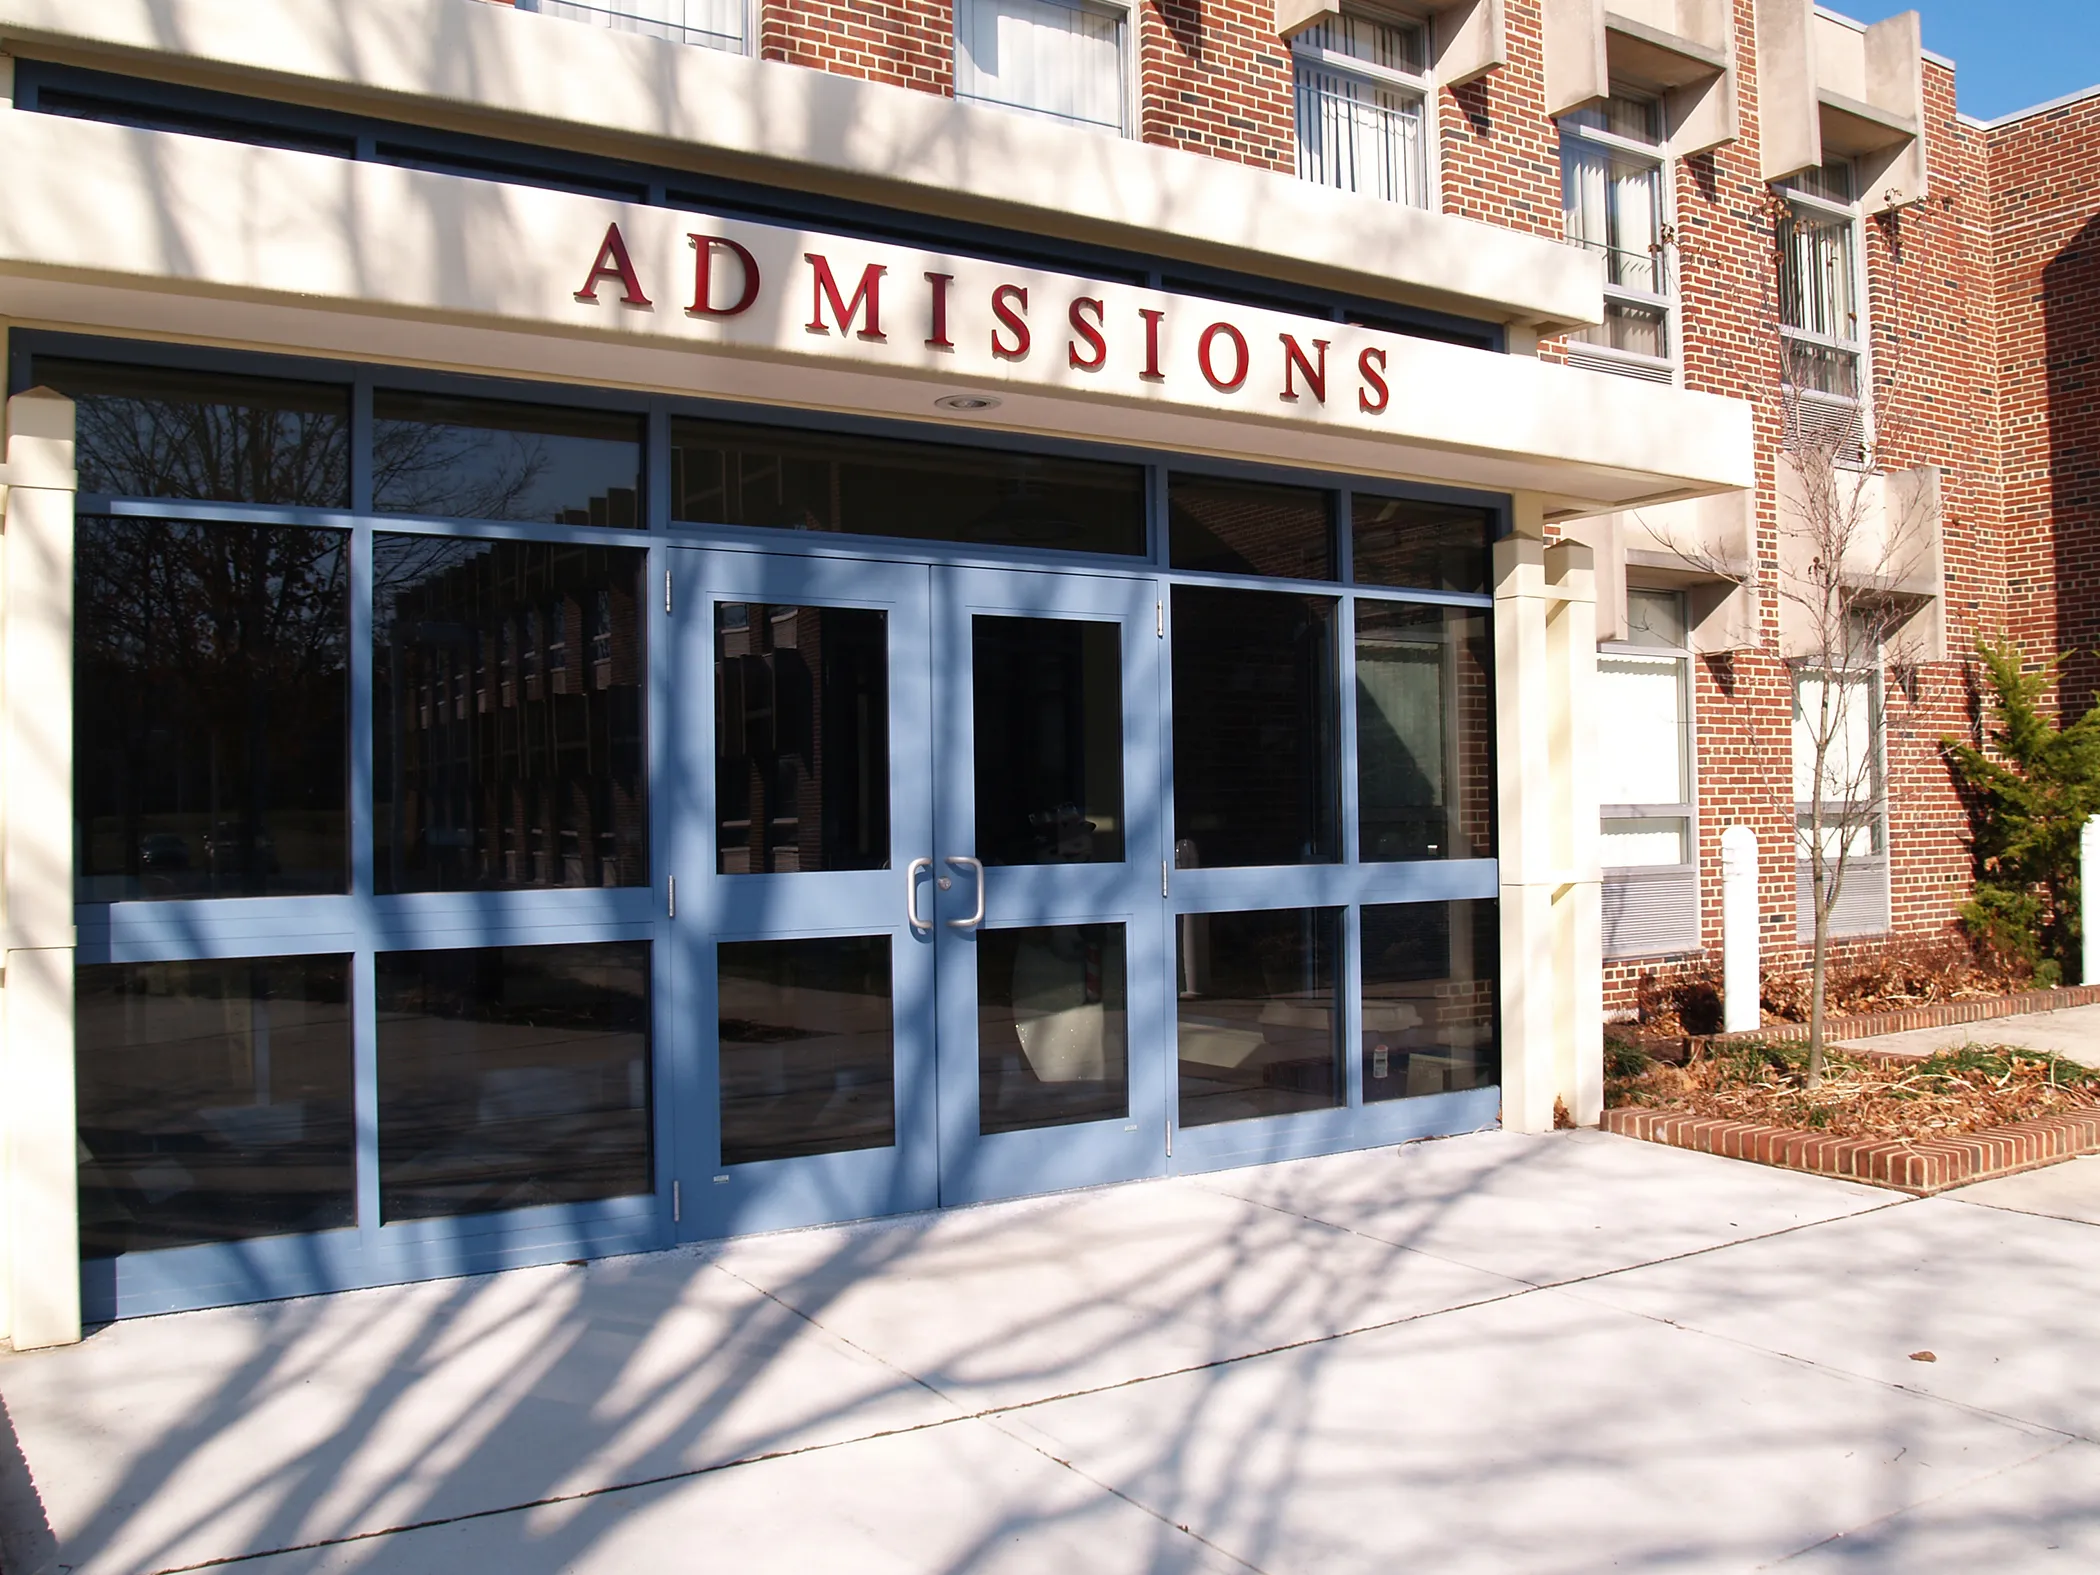 Office of Admissions